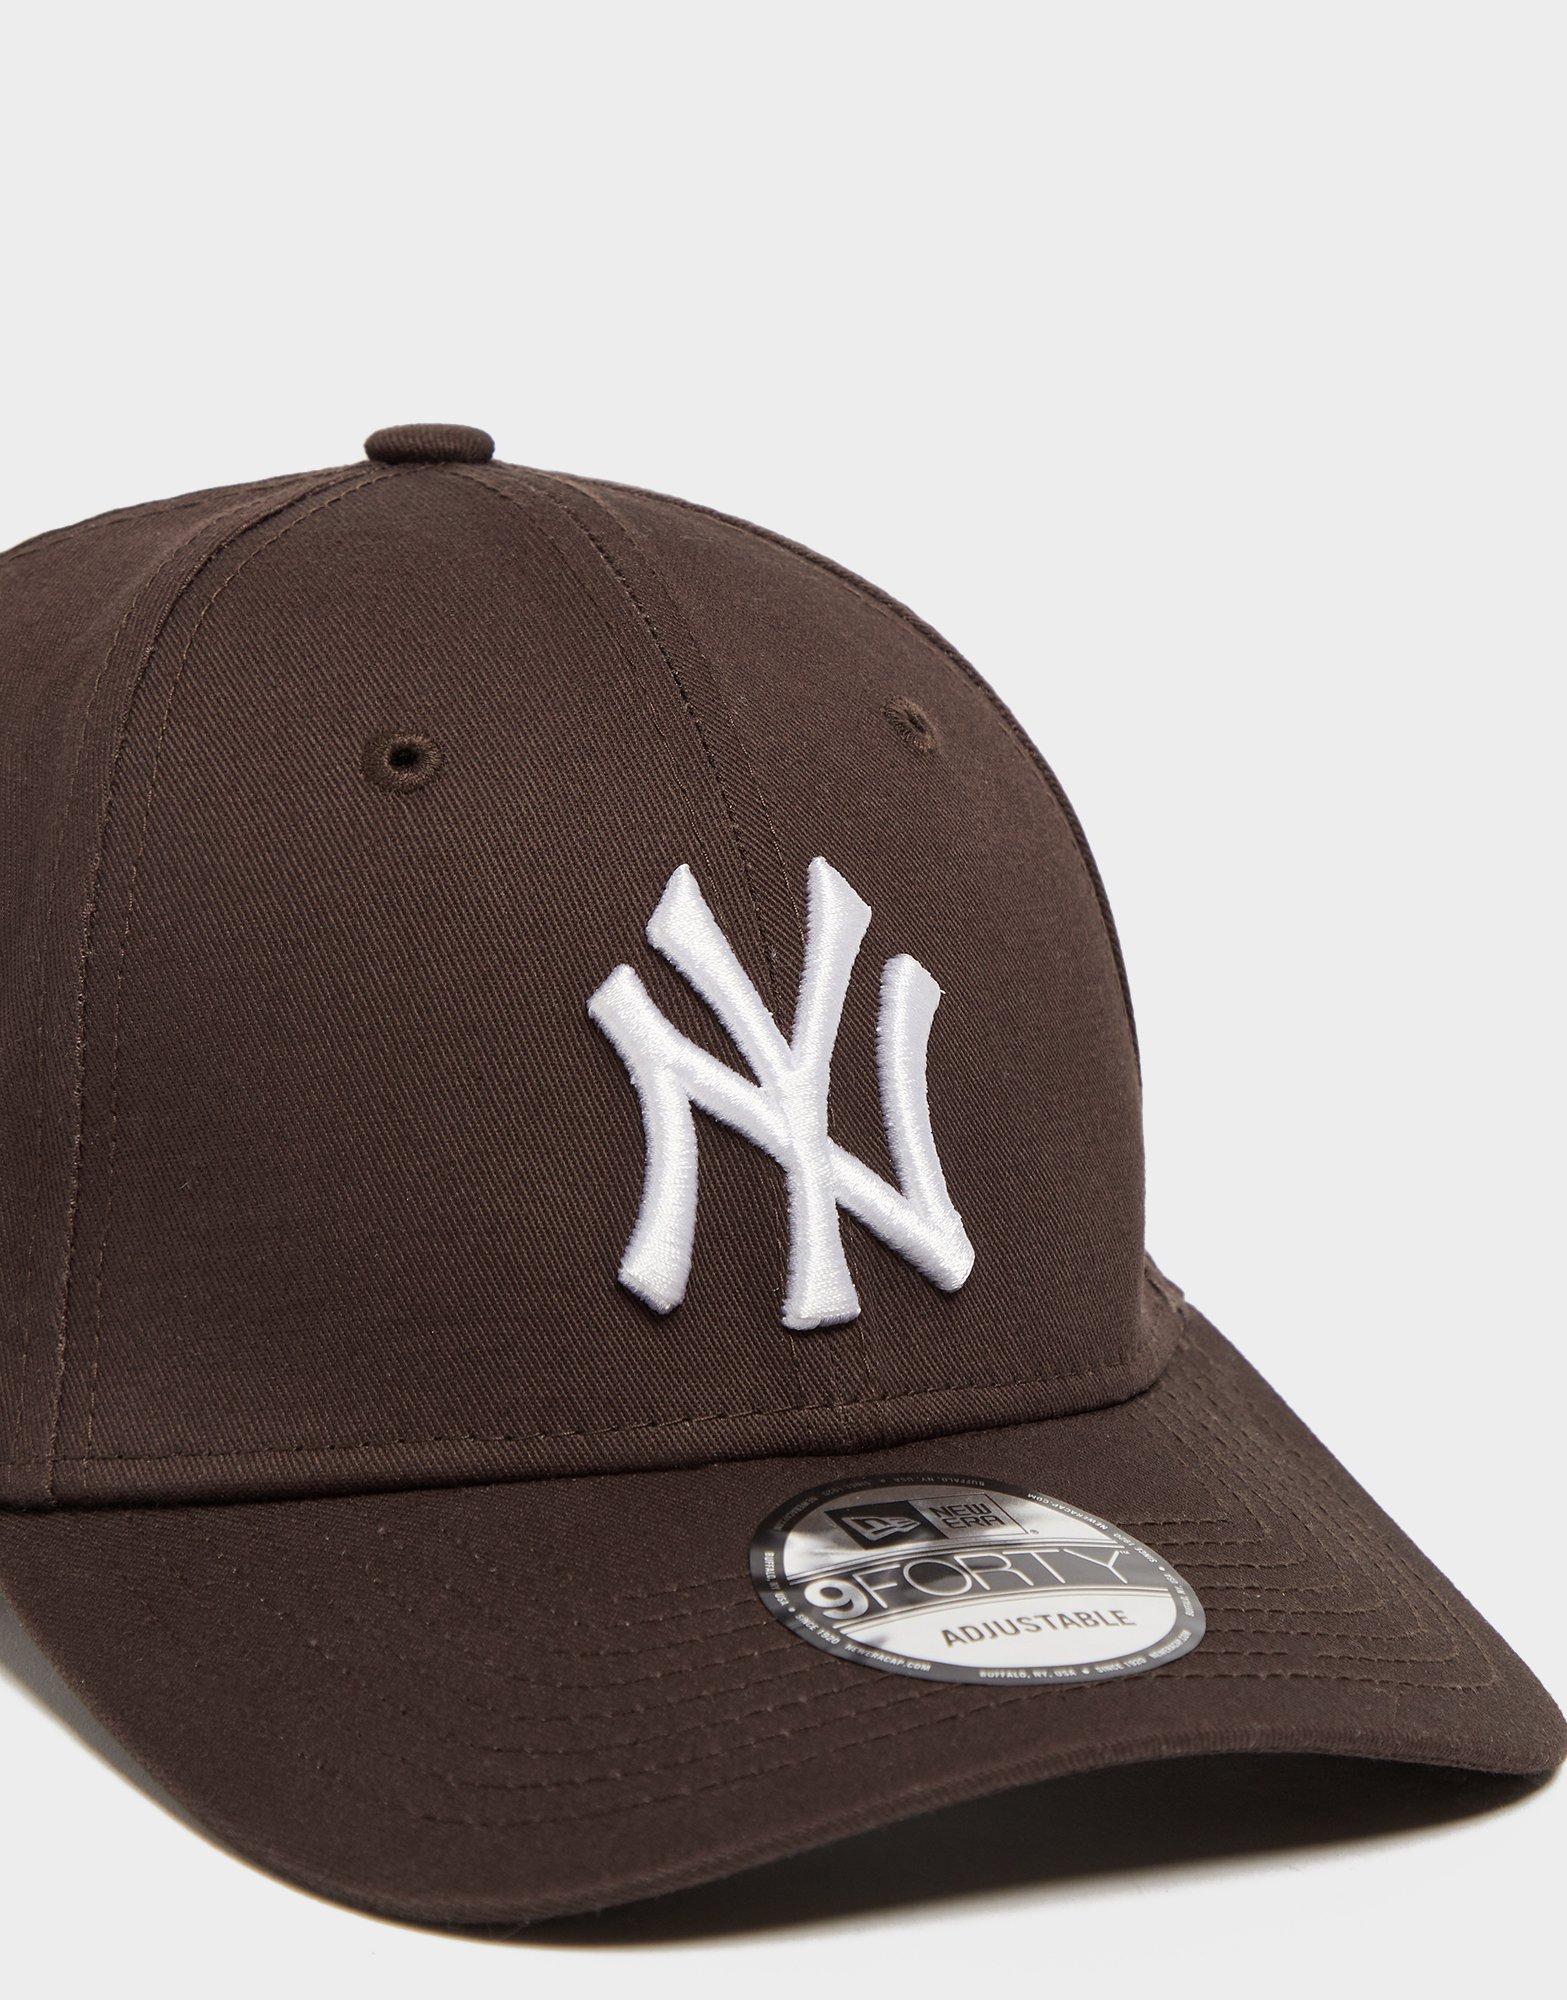  Mitchell & Ness Adult Size X-Large XL New York Yankees